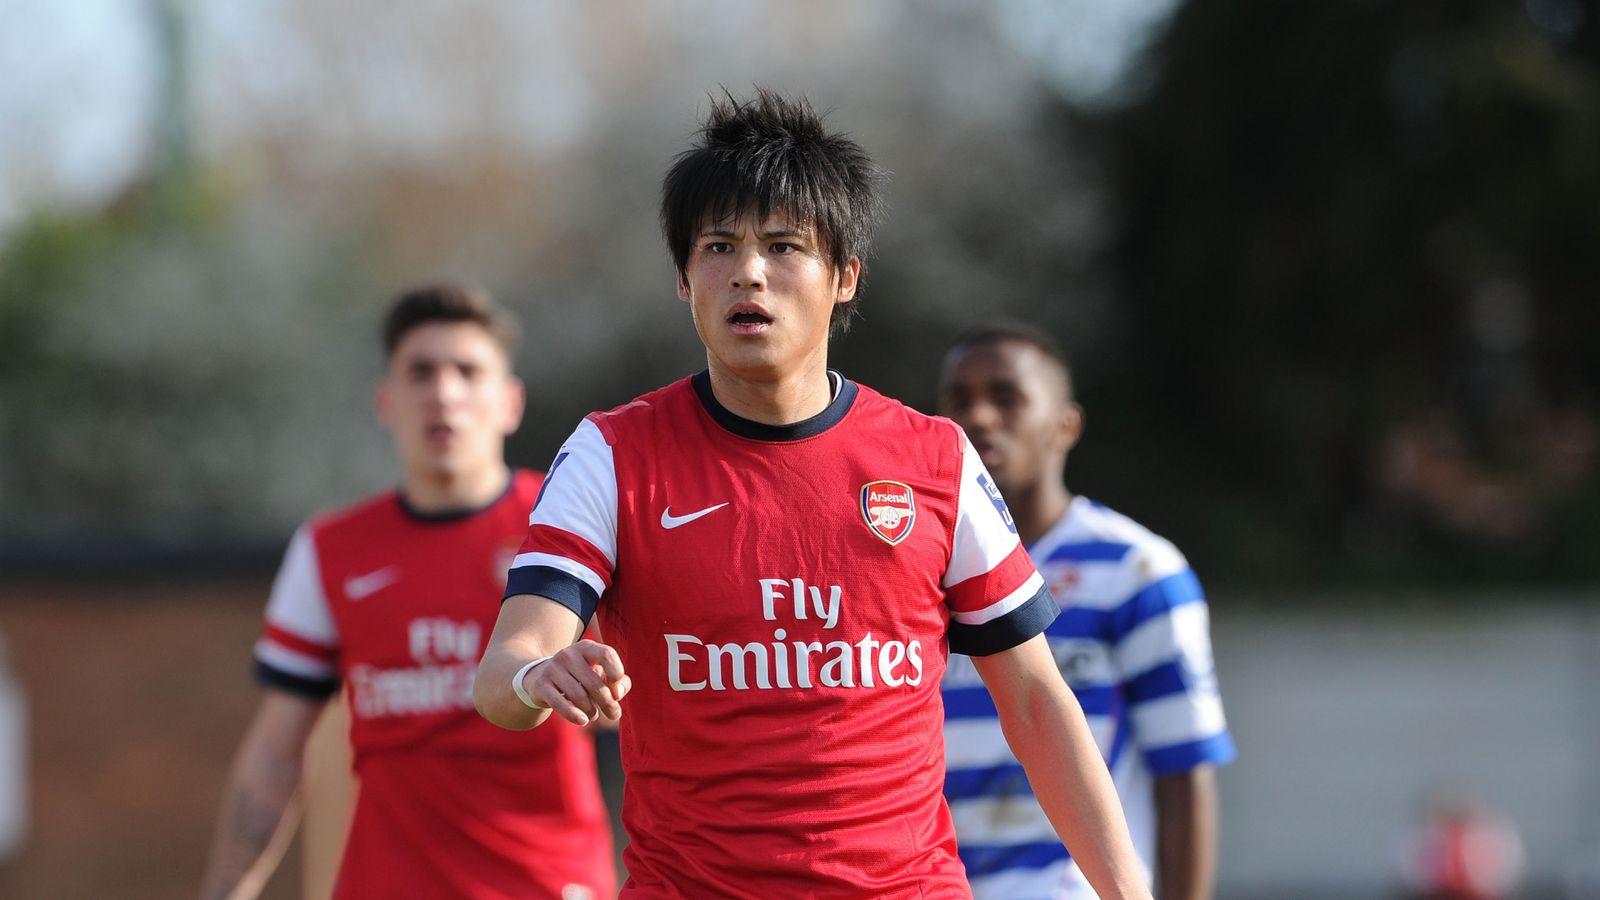 Arsenal confirm departures of senior and youth players